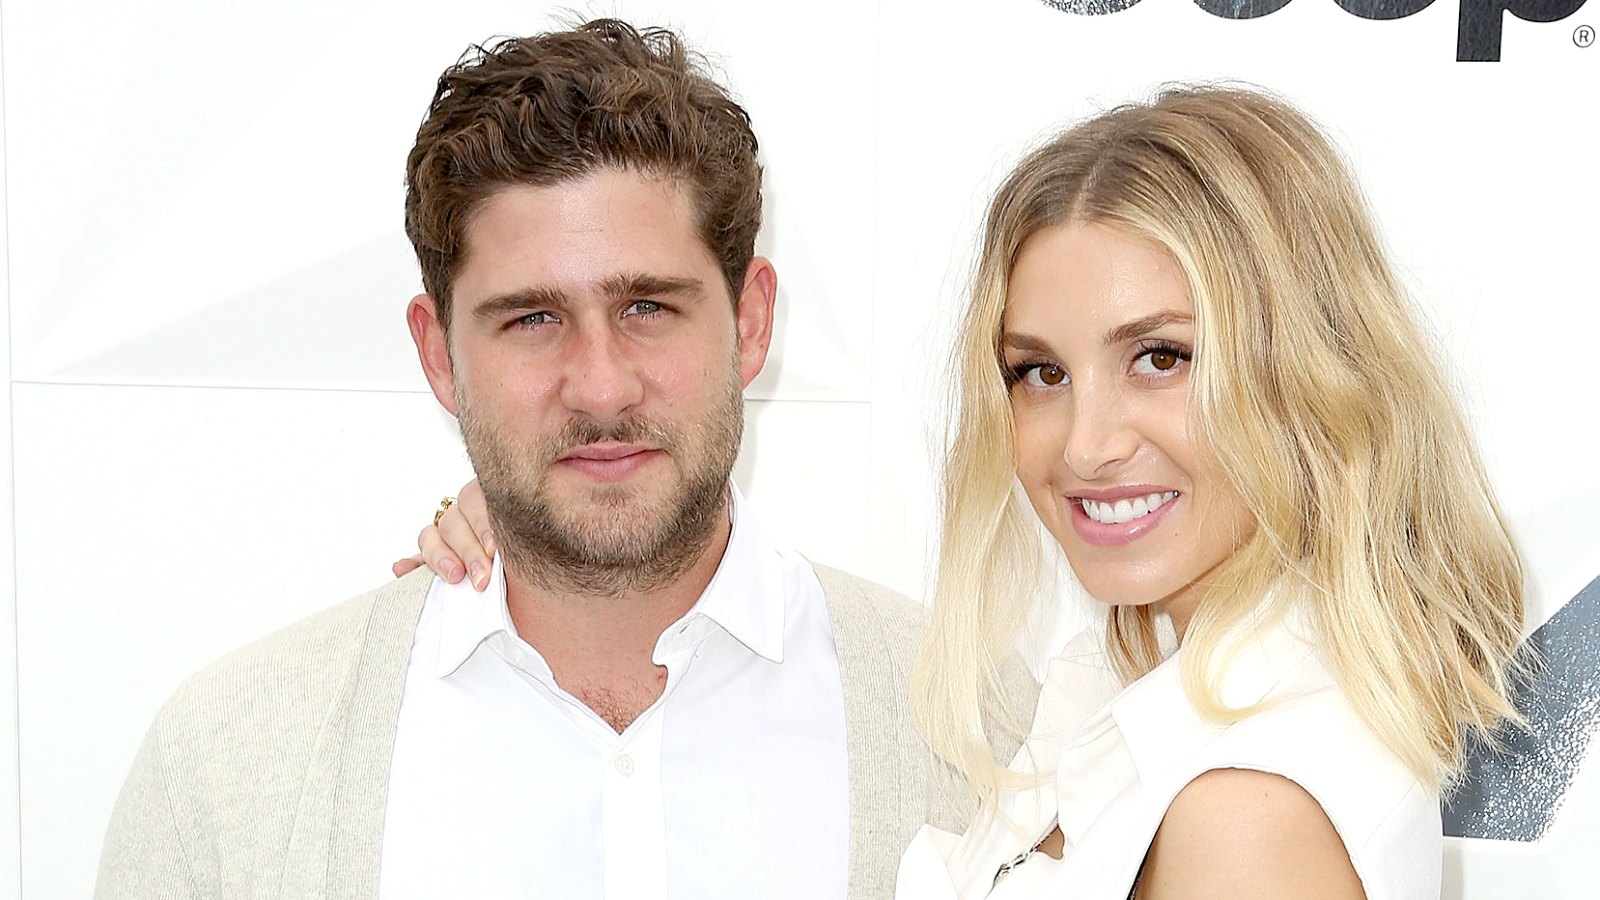 Tim Rosenman and Whitney Port attend the Portsea Polo event at Point Nepean Quarantine Station on January 10, 2015 in Melbourne, Australia.